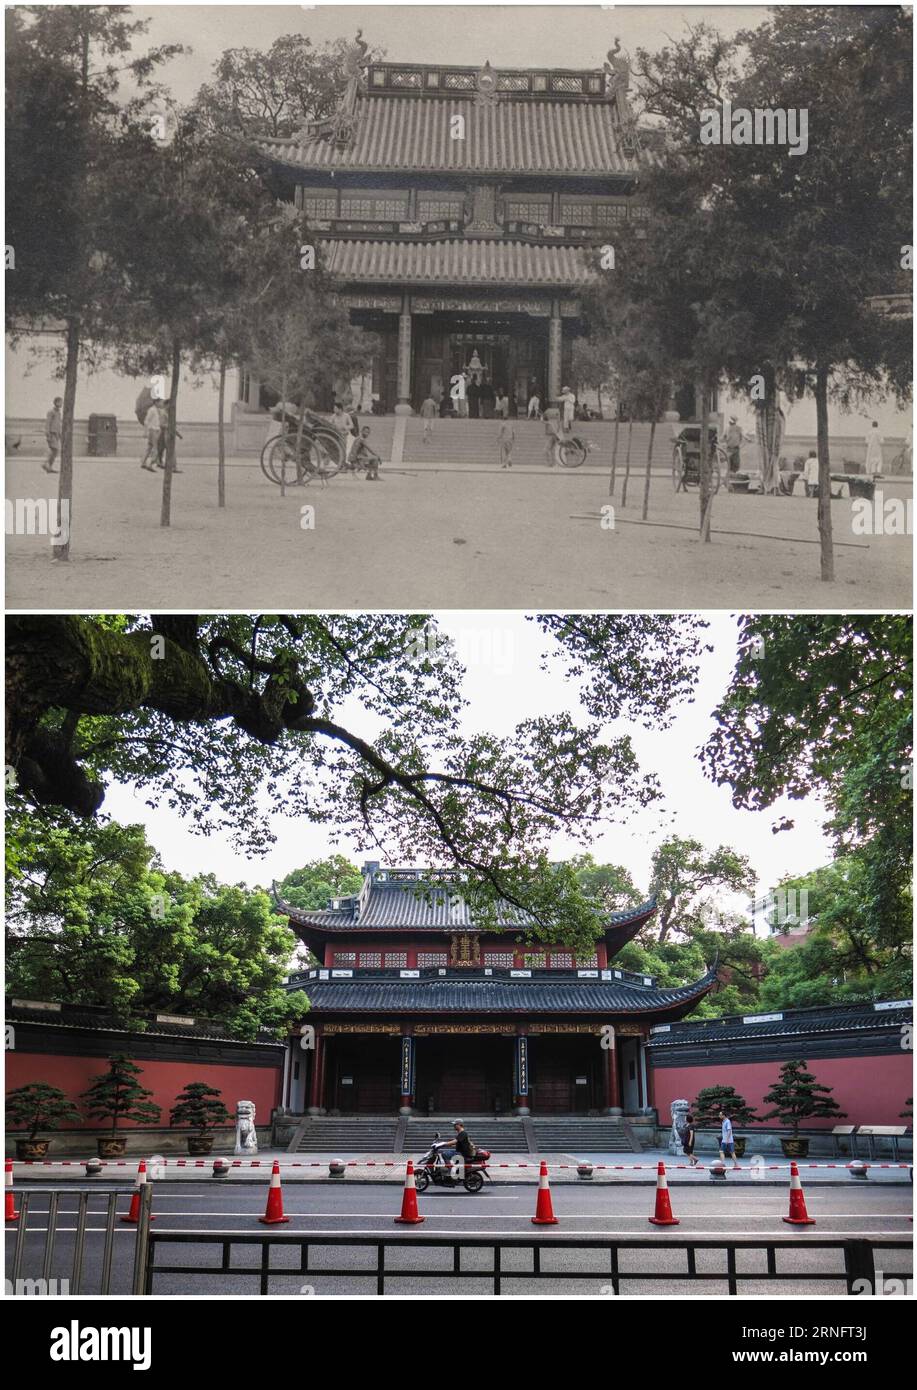 (160823) -- BEIJING, Aug. 23, 2016 () -- Combined photo shows the Temple of Yue Fei, an ancient Chinese patriotic hero, in Hangzhou, capital of east China s Zhejiang Province. The G20 Summit will be held on Sept. 4-5 in Hangzhou, dubbed paradise on earth with a history of over 2,200 years. (The file photo was provided by Wang Qiuhang while the lower photo was taken by Xu Yu on Aug. 18, 2016.) () (mp) CHINA-ZHEJIANG-HANGZHOU-SCENERY-CHANGES (CN) Xinhua PUBLICATIONxNOTxINxCHN   160823 Beijing Aug 23 2016 Combined Photo Shows The Temple of Yue Fei to Ancient Chinese Patriotic Hero in Hangzhou Cap Stock Photo